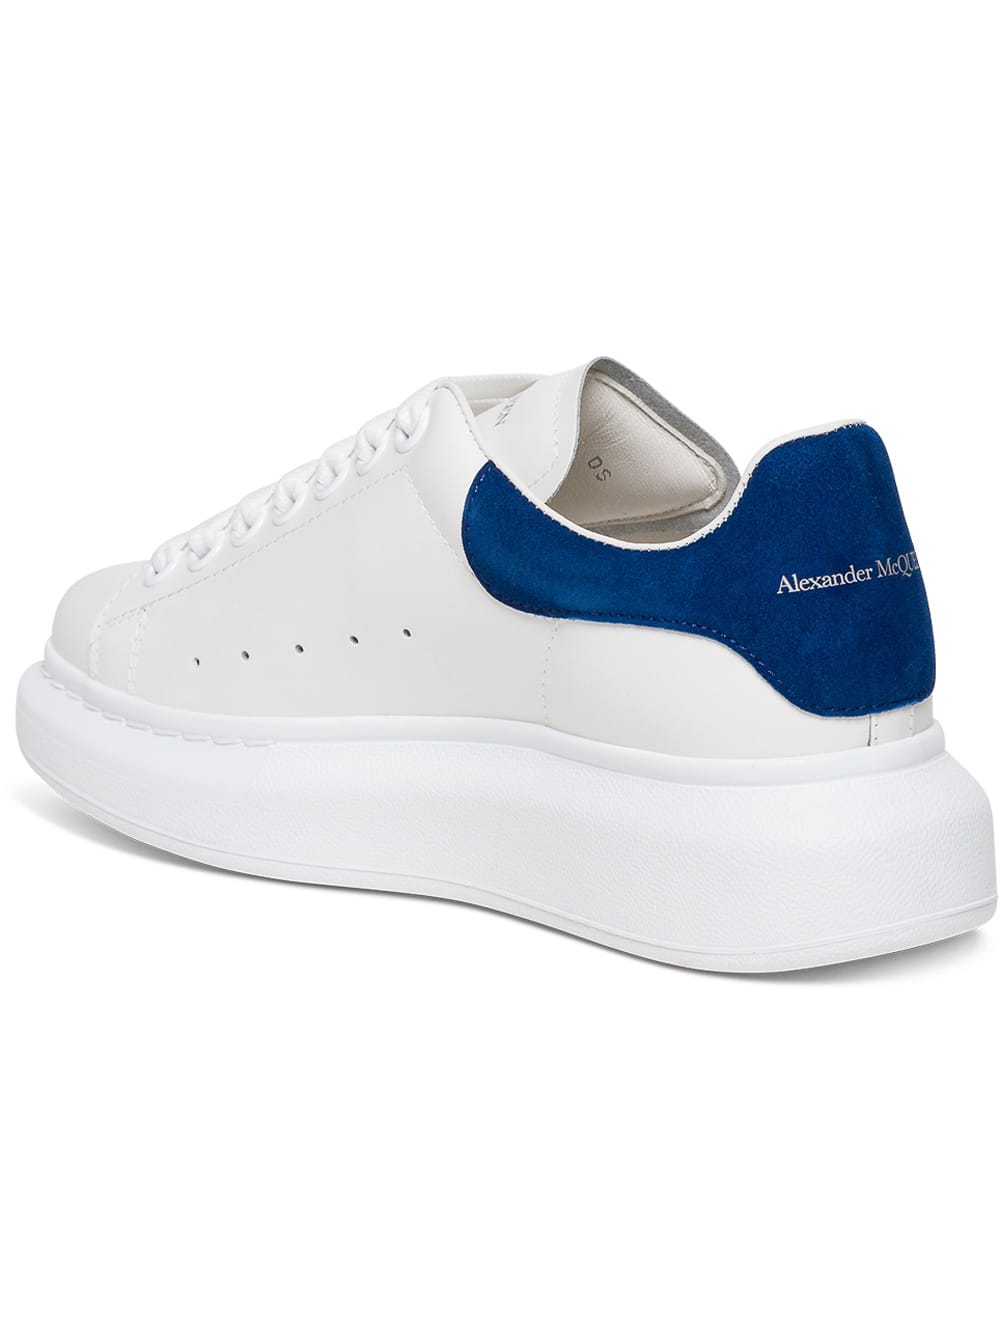 Alexander McQueen Larry White And Blue Leather Sneakers Alexander Mcqueen Woman